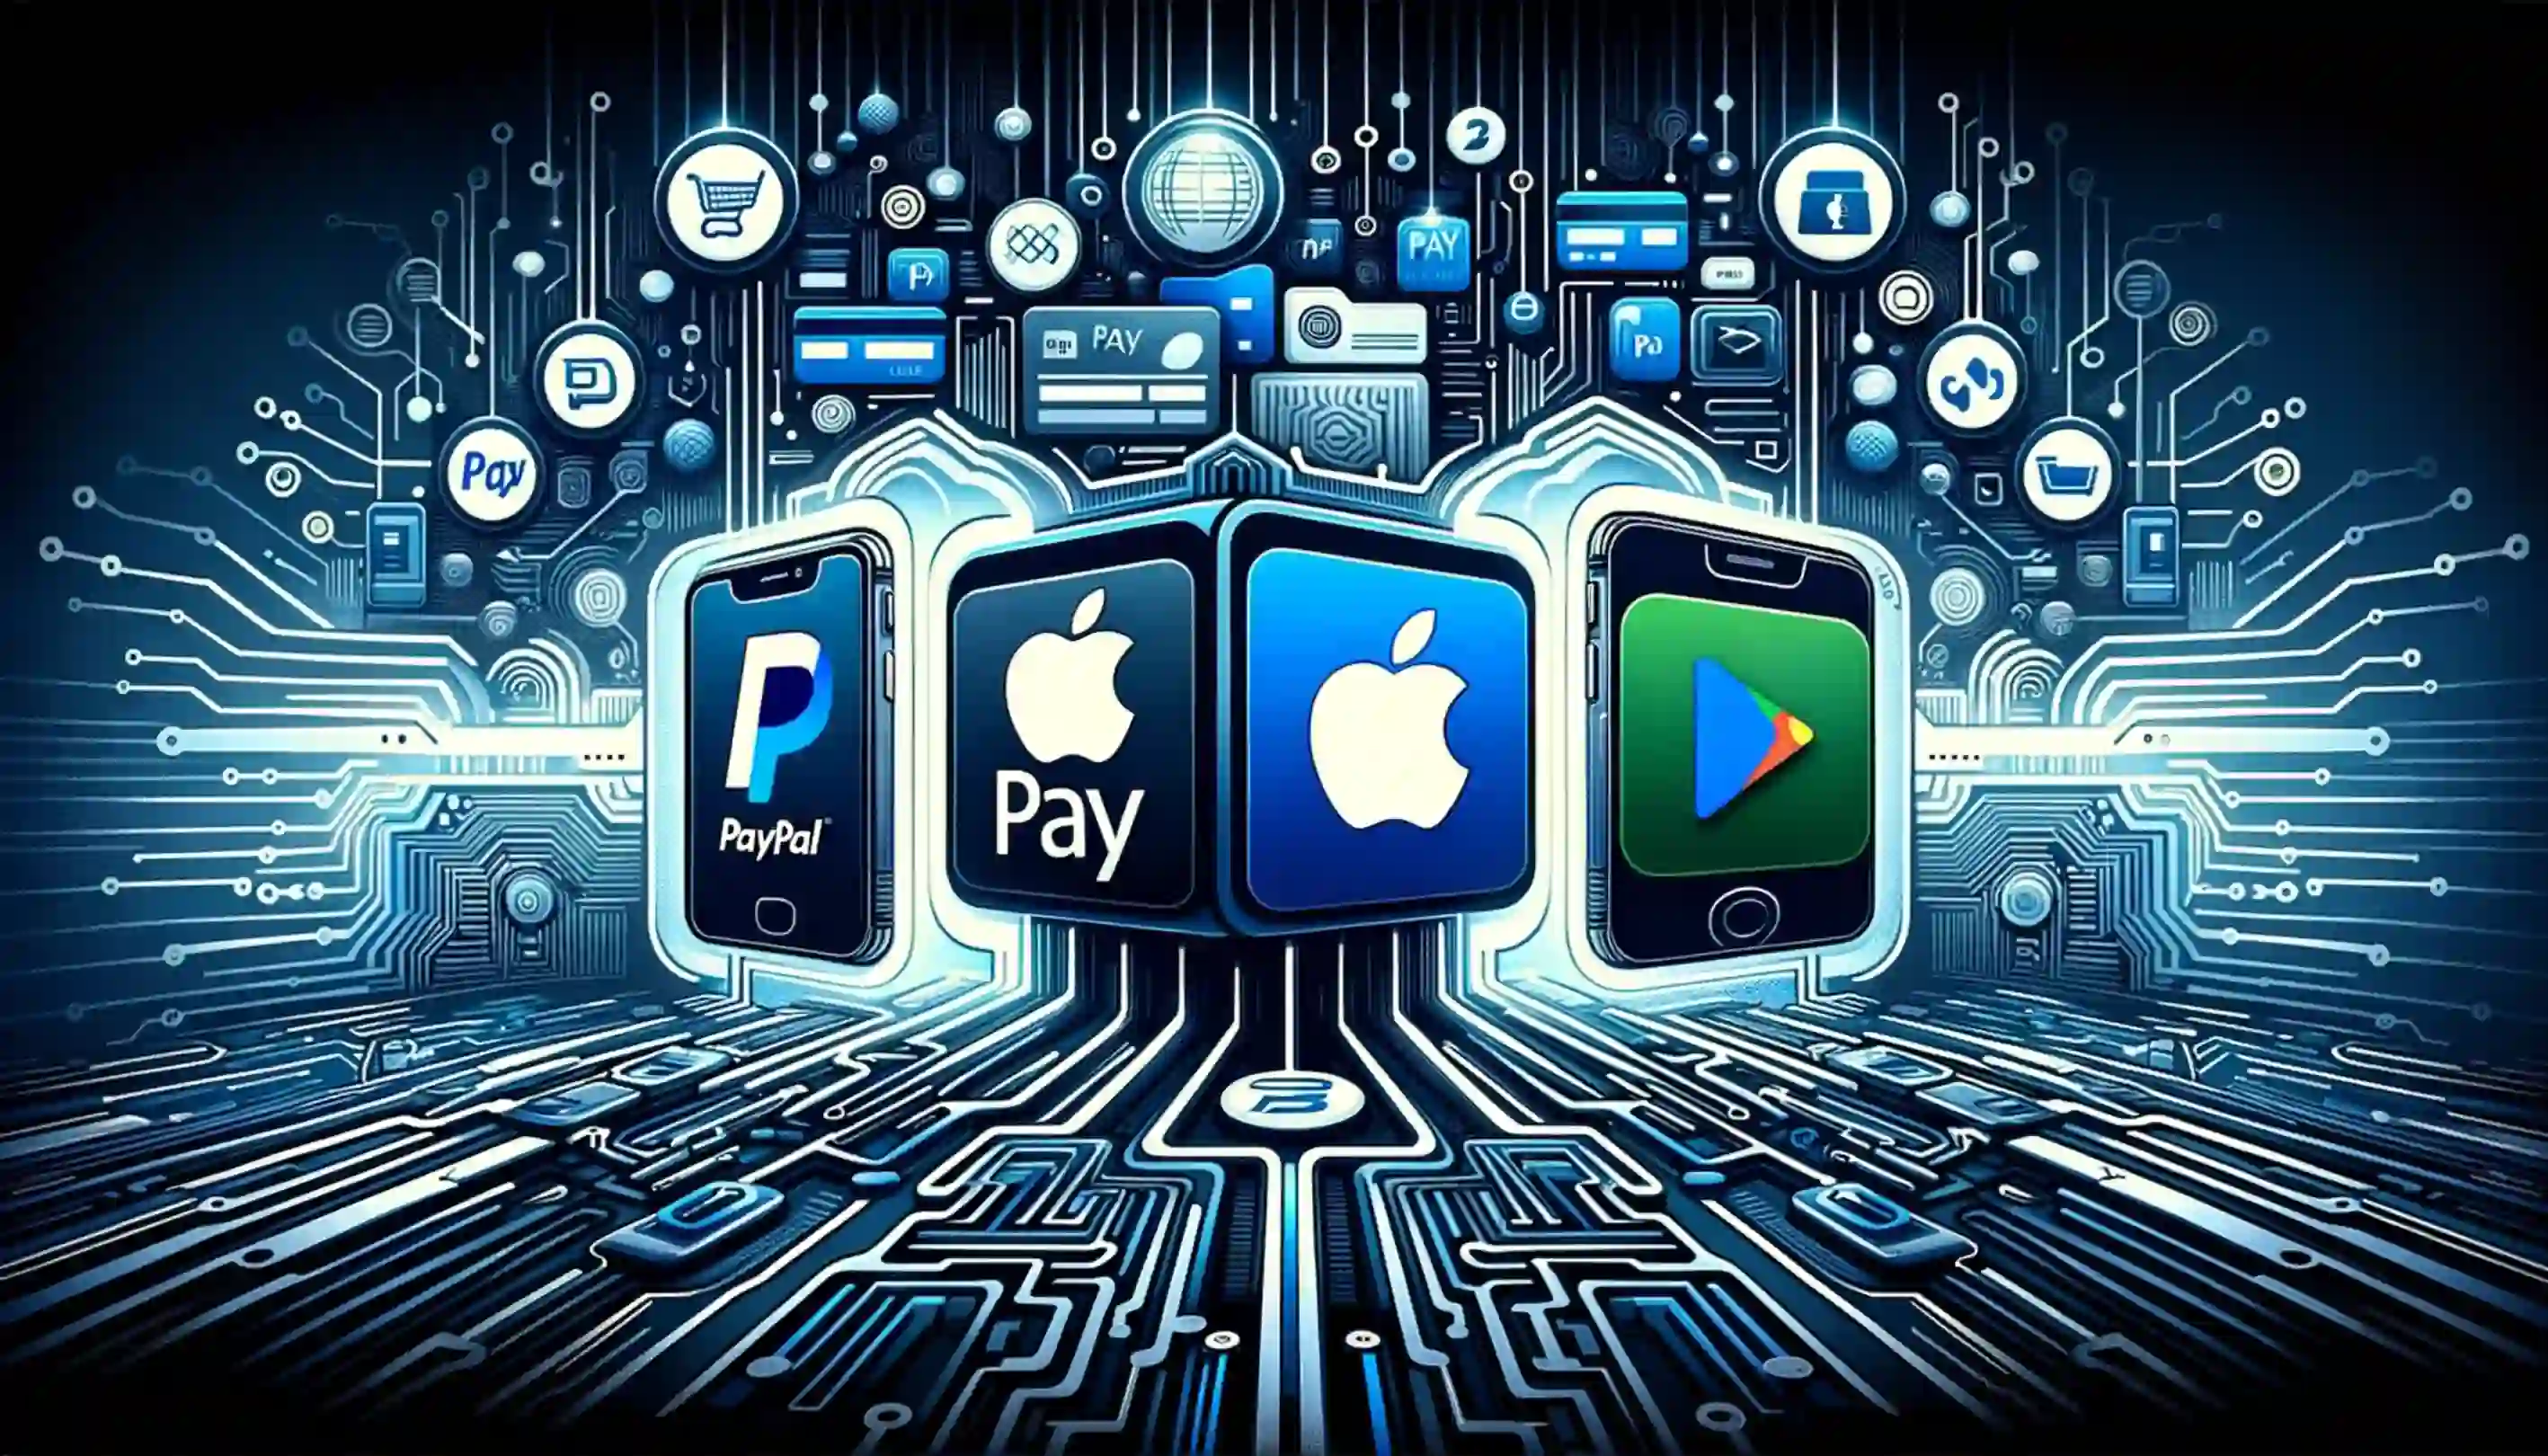 type of payment gateway - paypal, apple pay, google pay